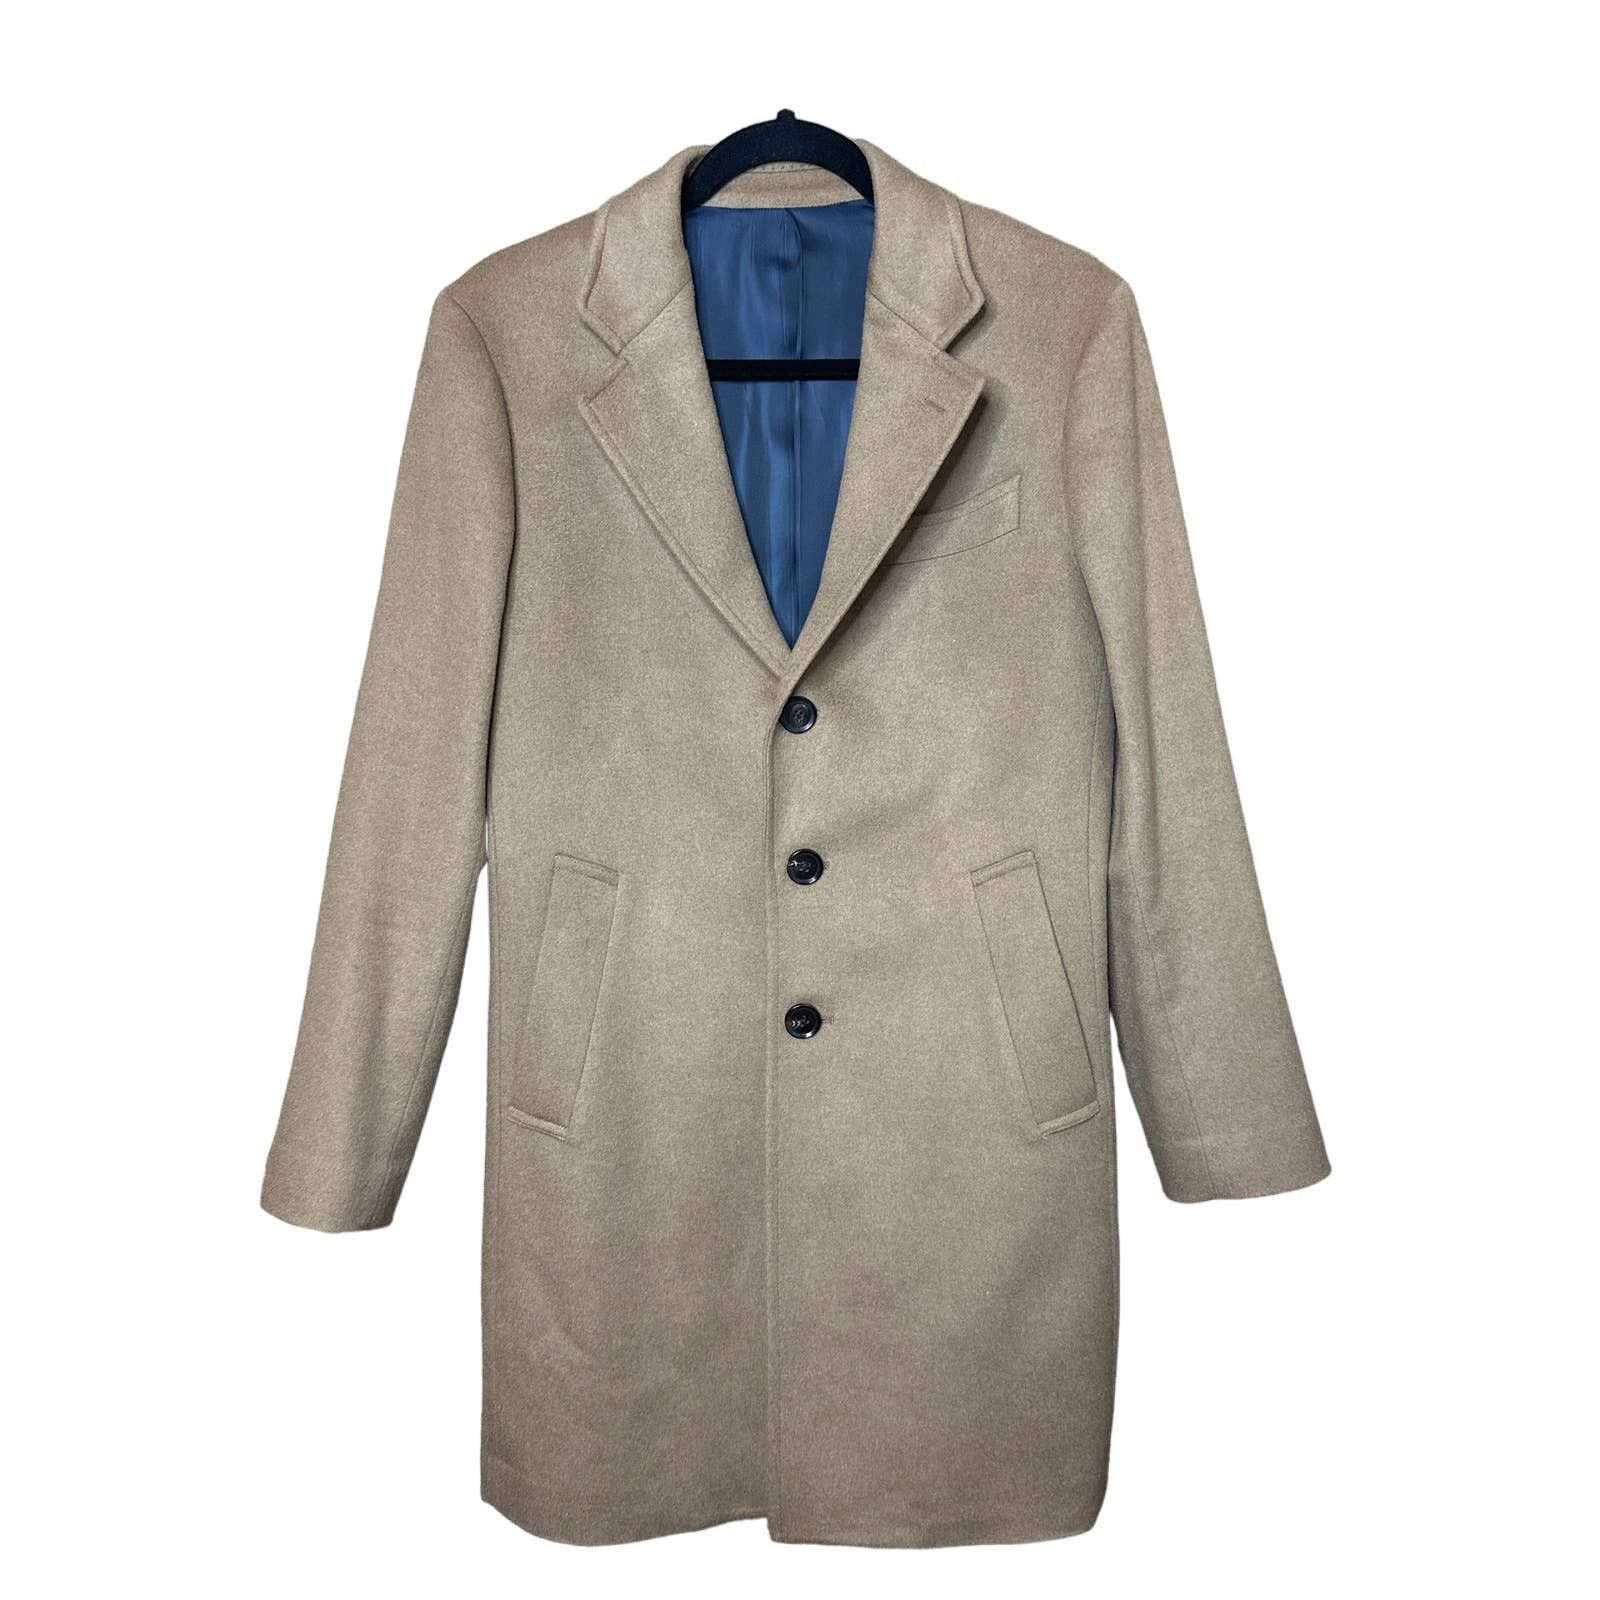 Spier And Mackay Spier And Mackay Camel Wool & Cashmere Overcoat Size ...